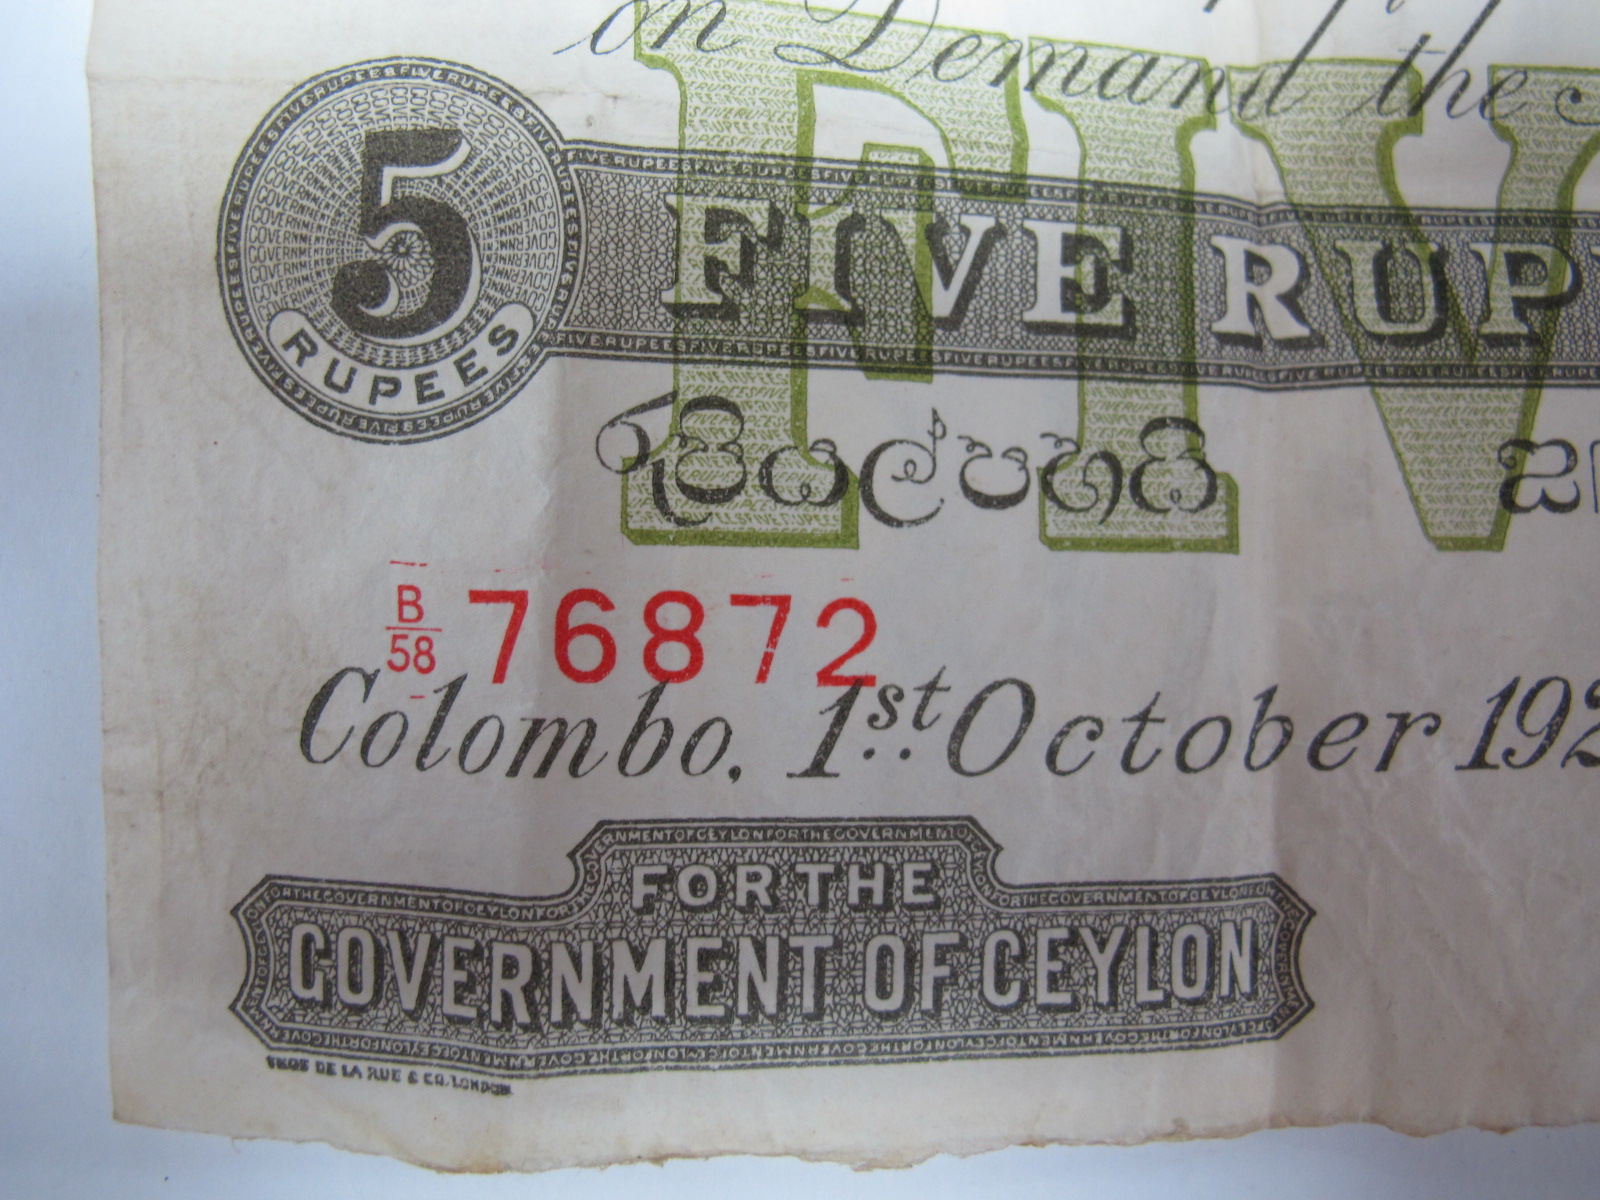 A Government of Ceylon Five Rupee Banknote, Colombo, 1st October 1925. Number B58 76872. Much folded - Image 3 of 7